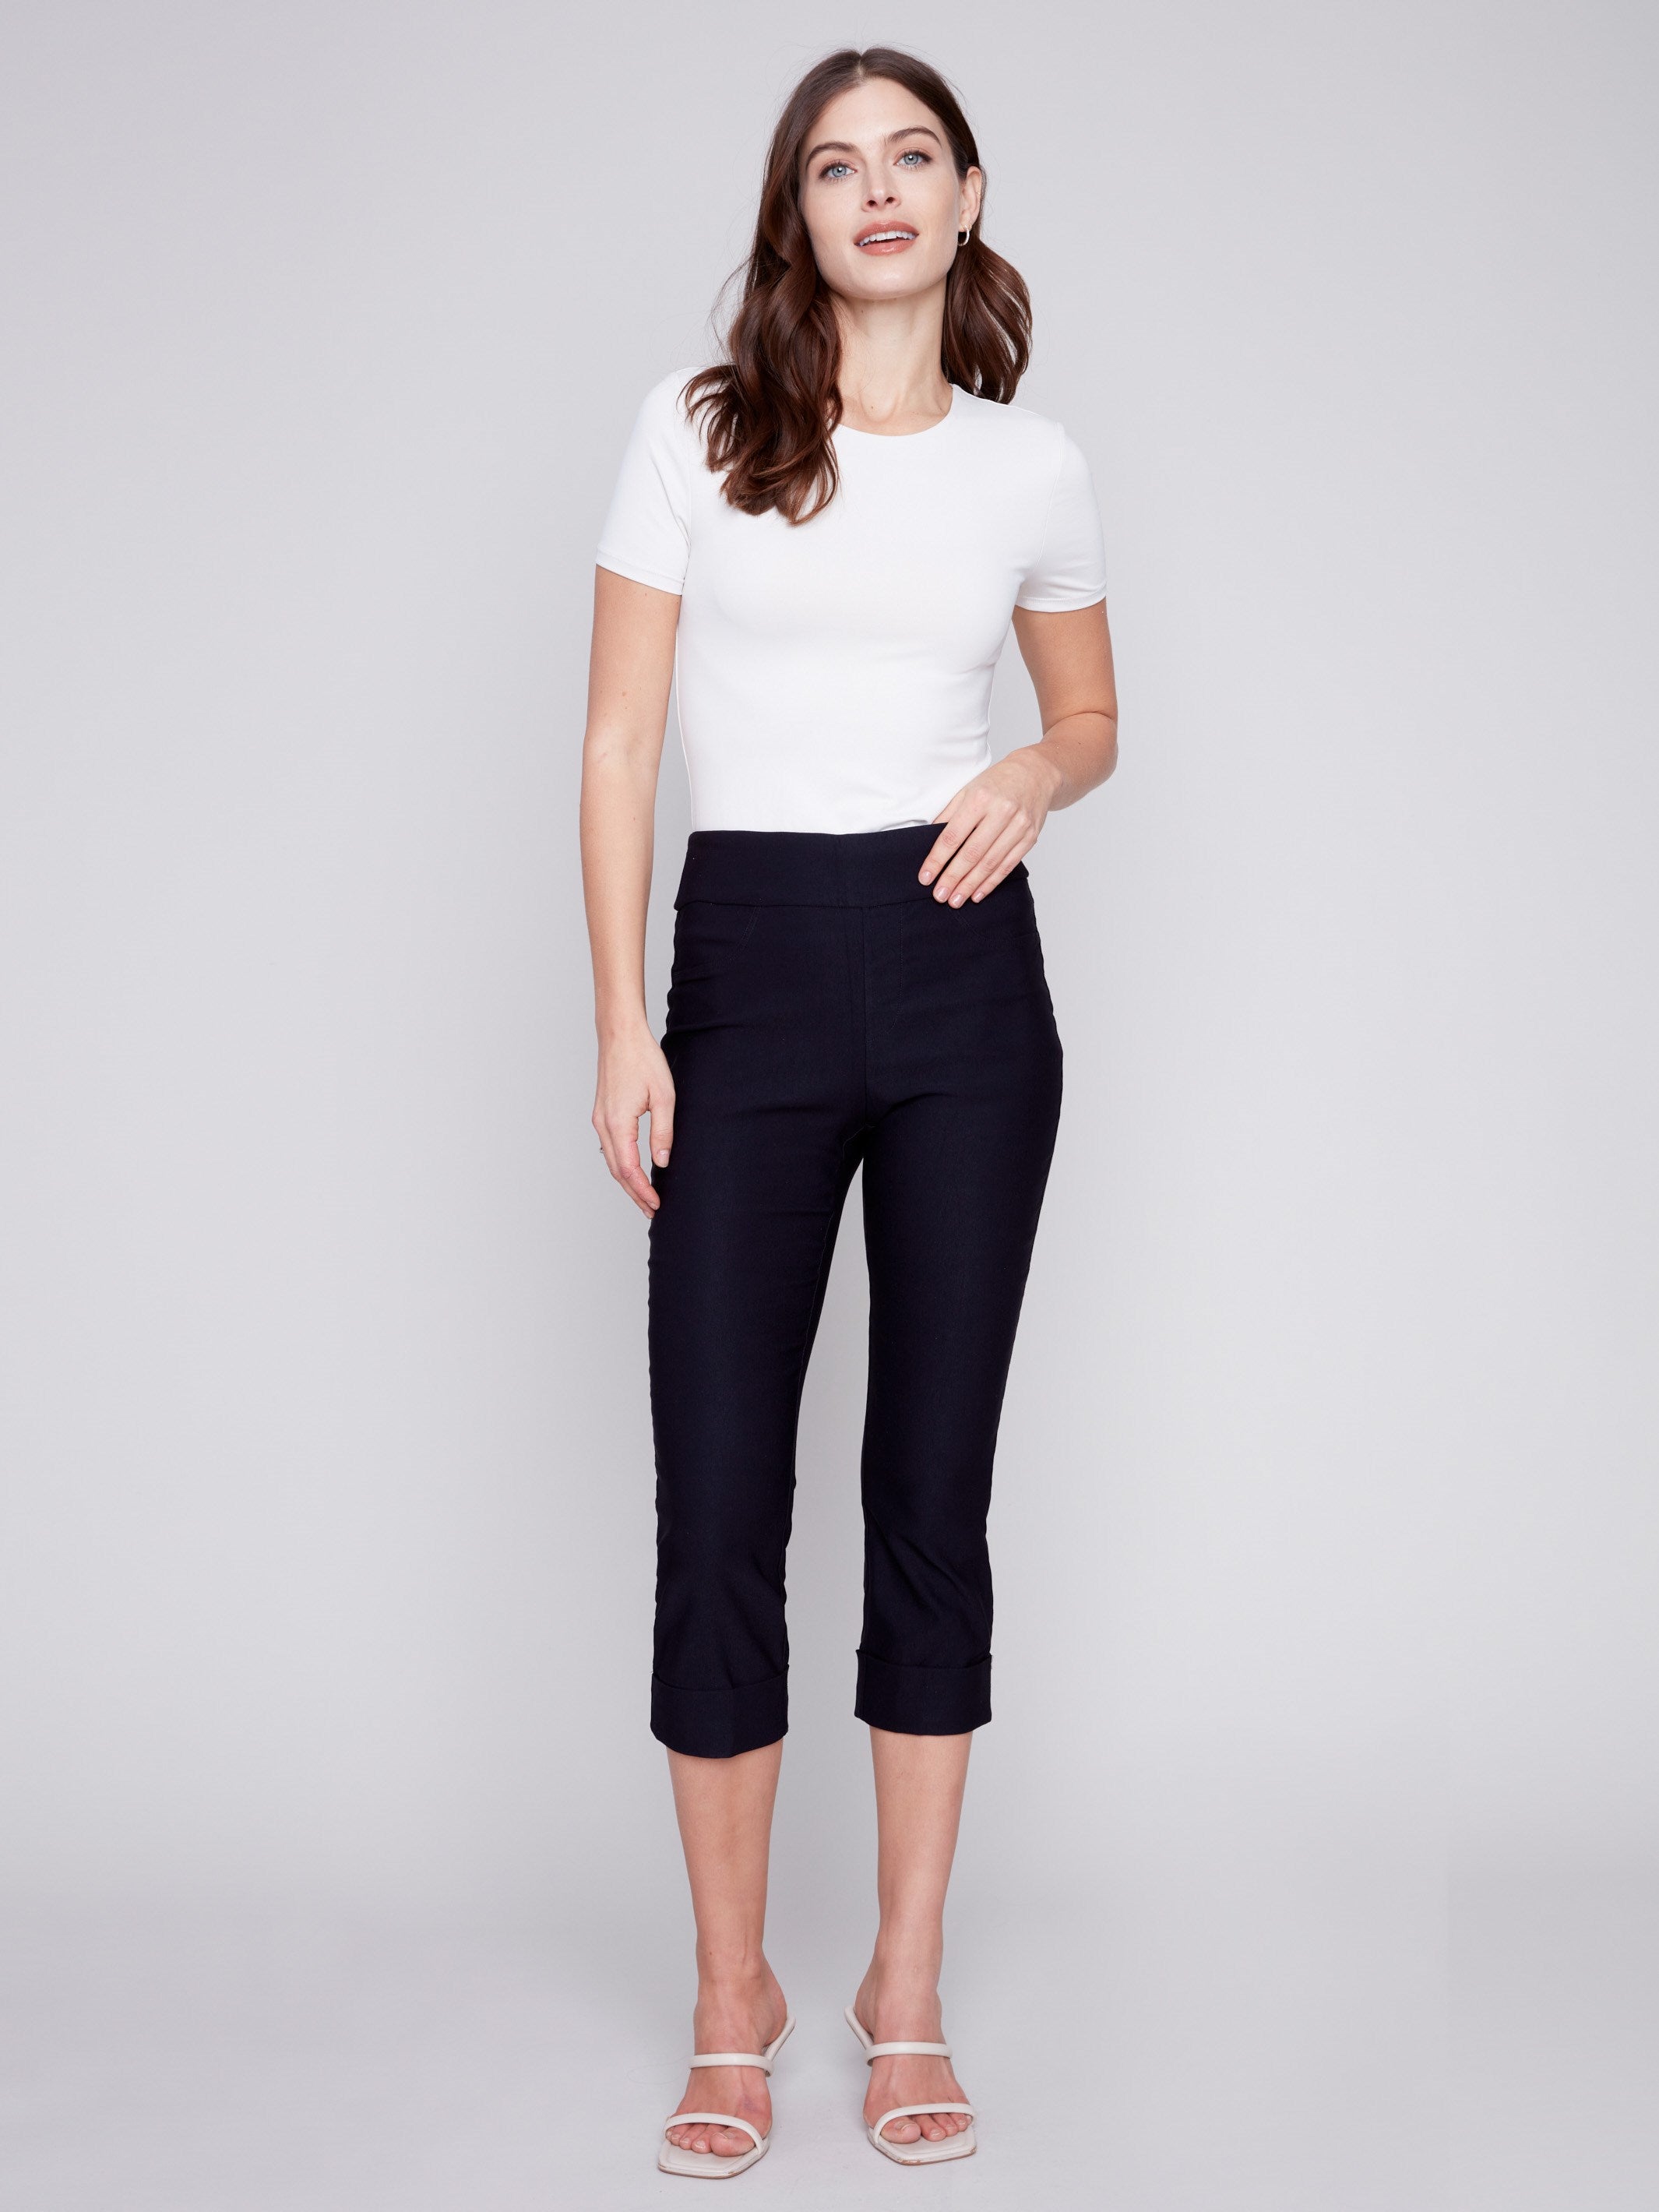 Stretch Pull-On Capri Pants - Black - Charlie B Collection Canada - Image 4